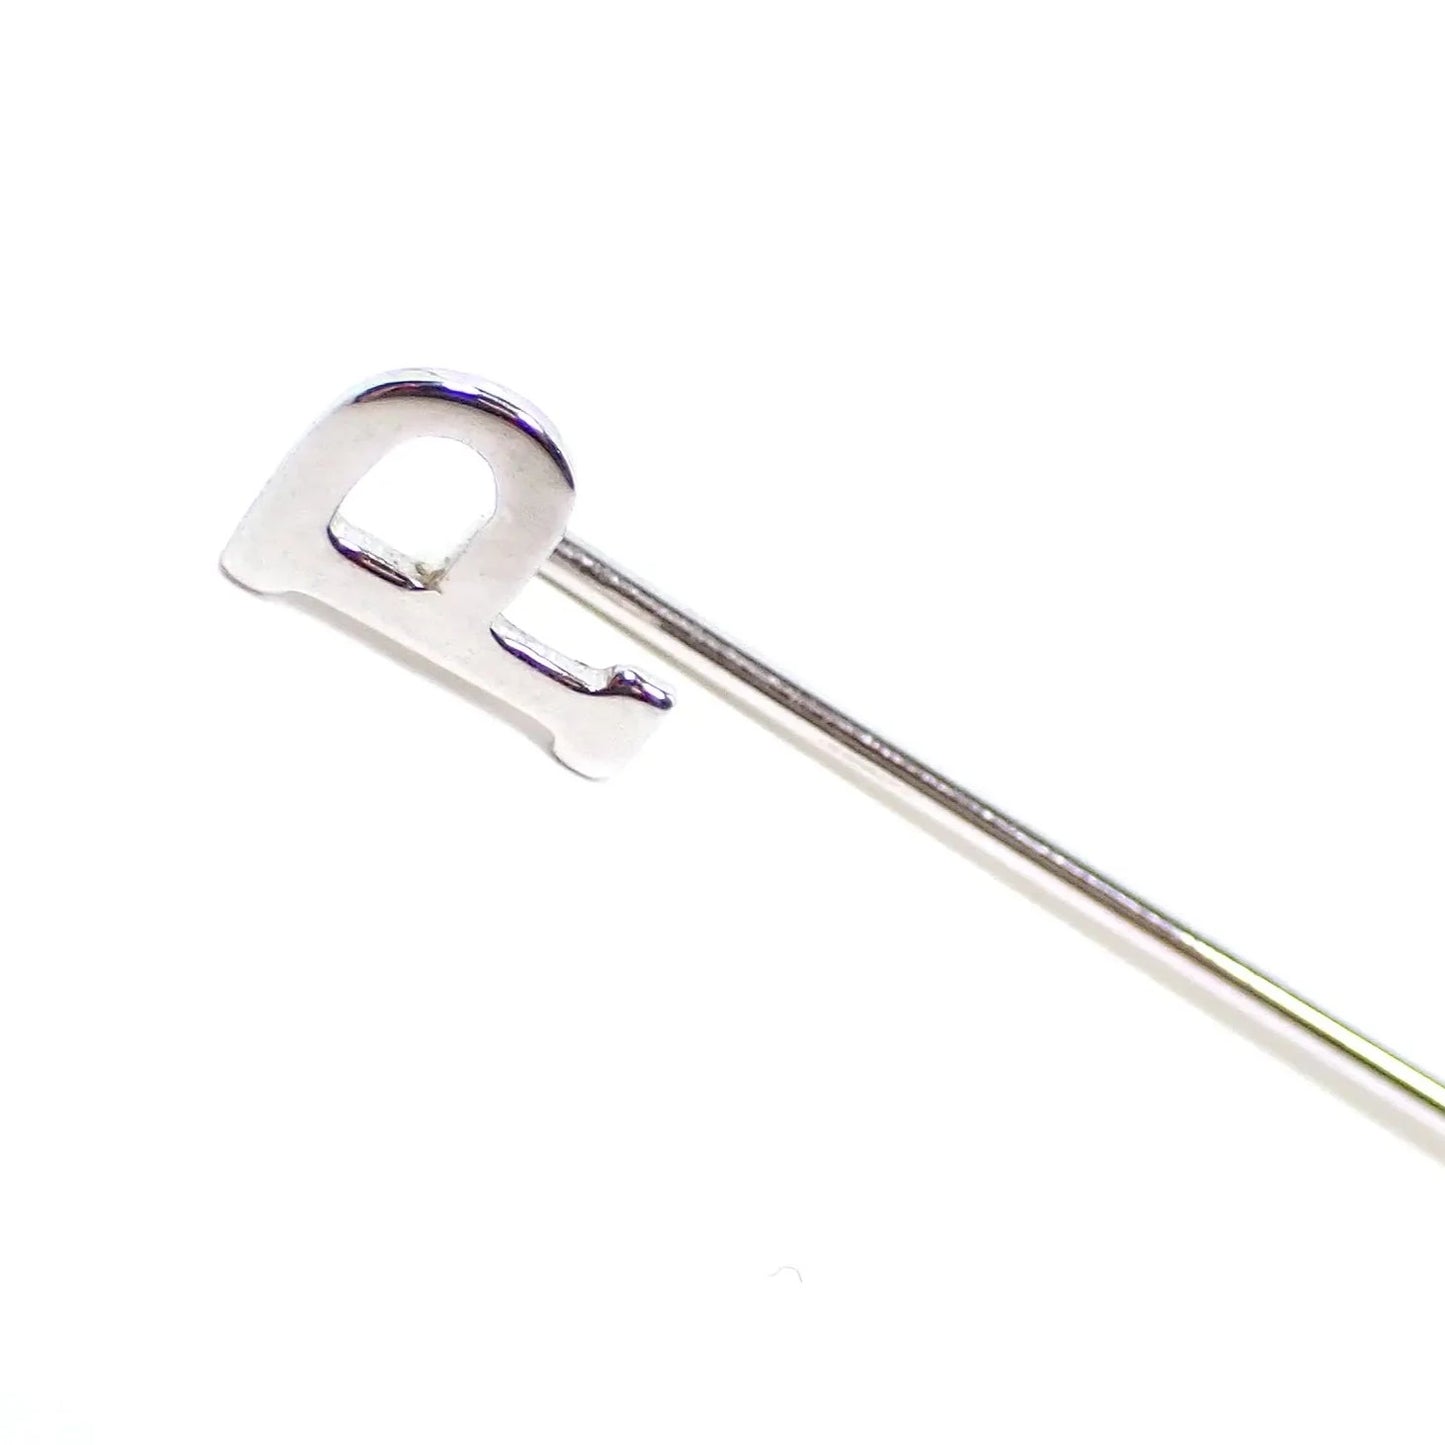 Enlarged view of the retro vintage initial lapel stick pin. It has a block style letter P at the top. The metal is silver tone in color.